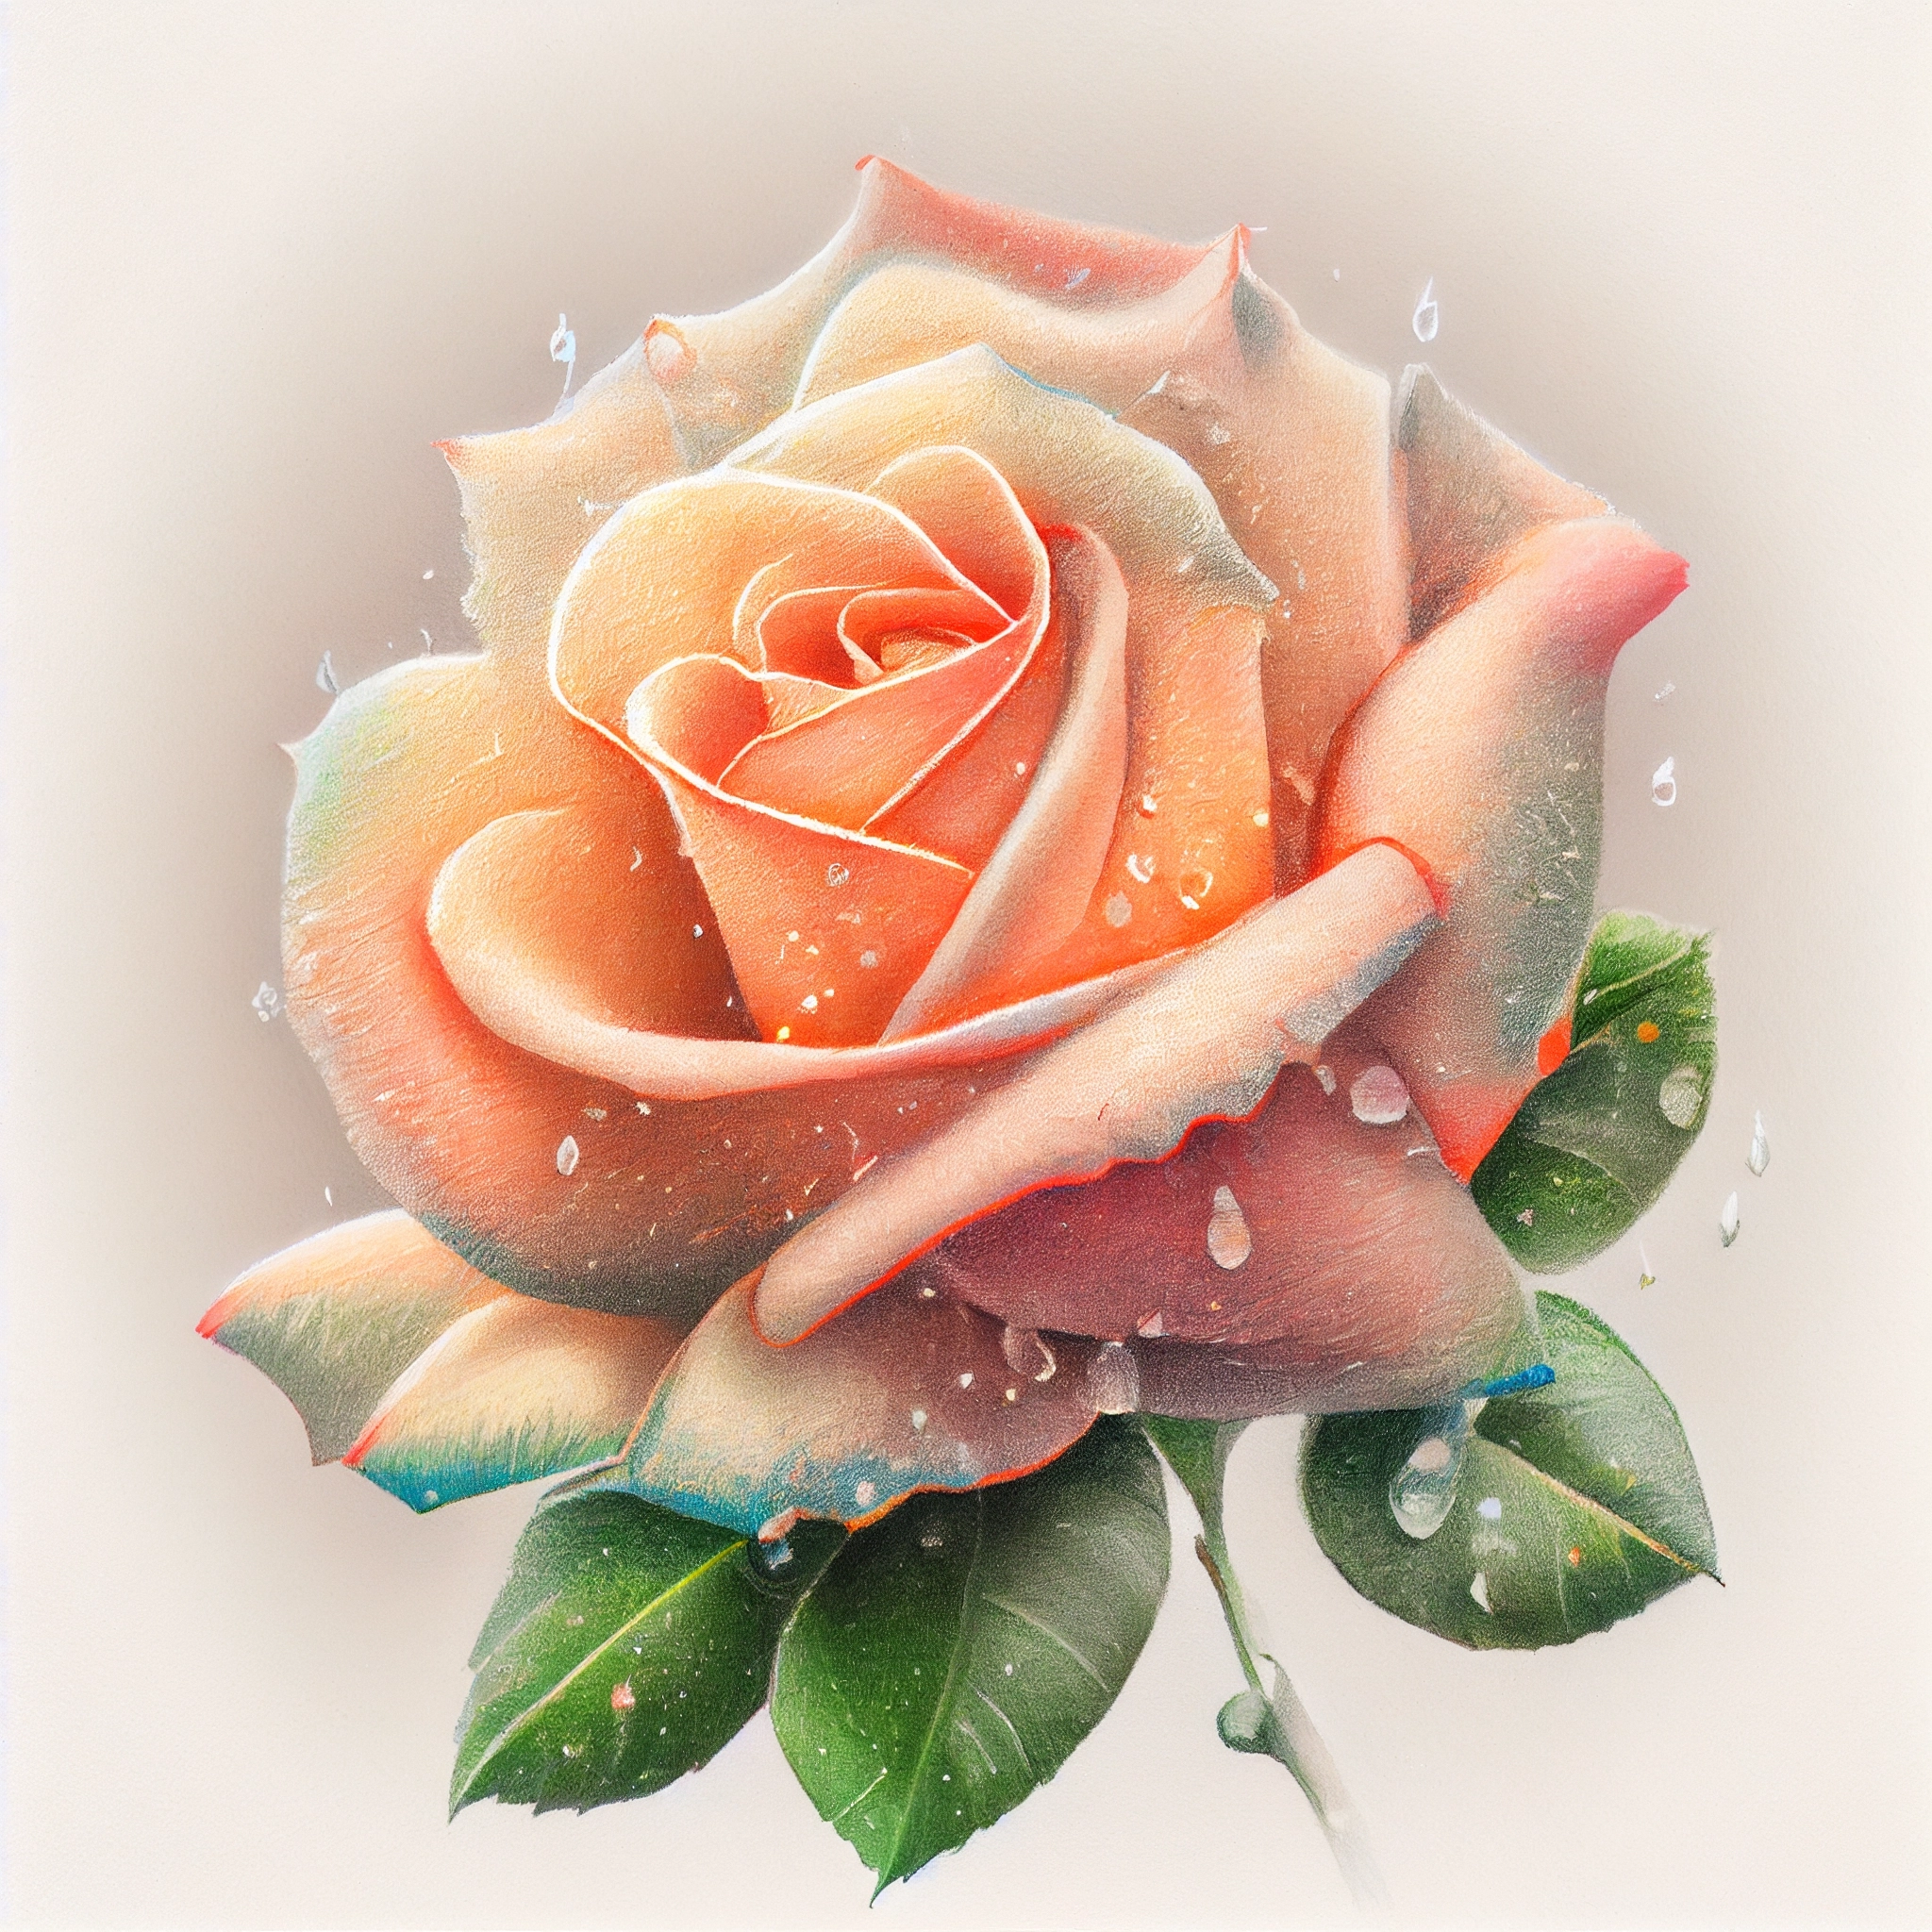 Dewy Delight: Pencil Art Print of Cream Rose with Glistening Dewdrops